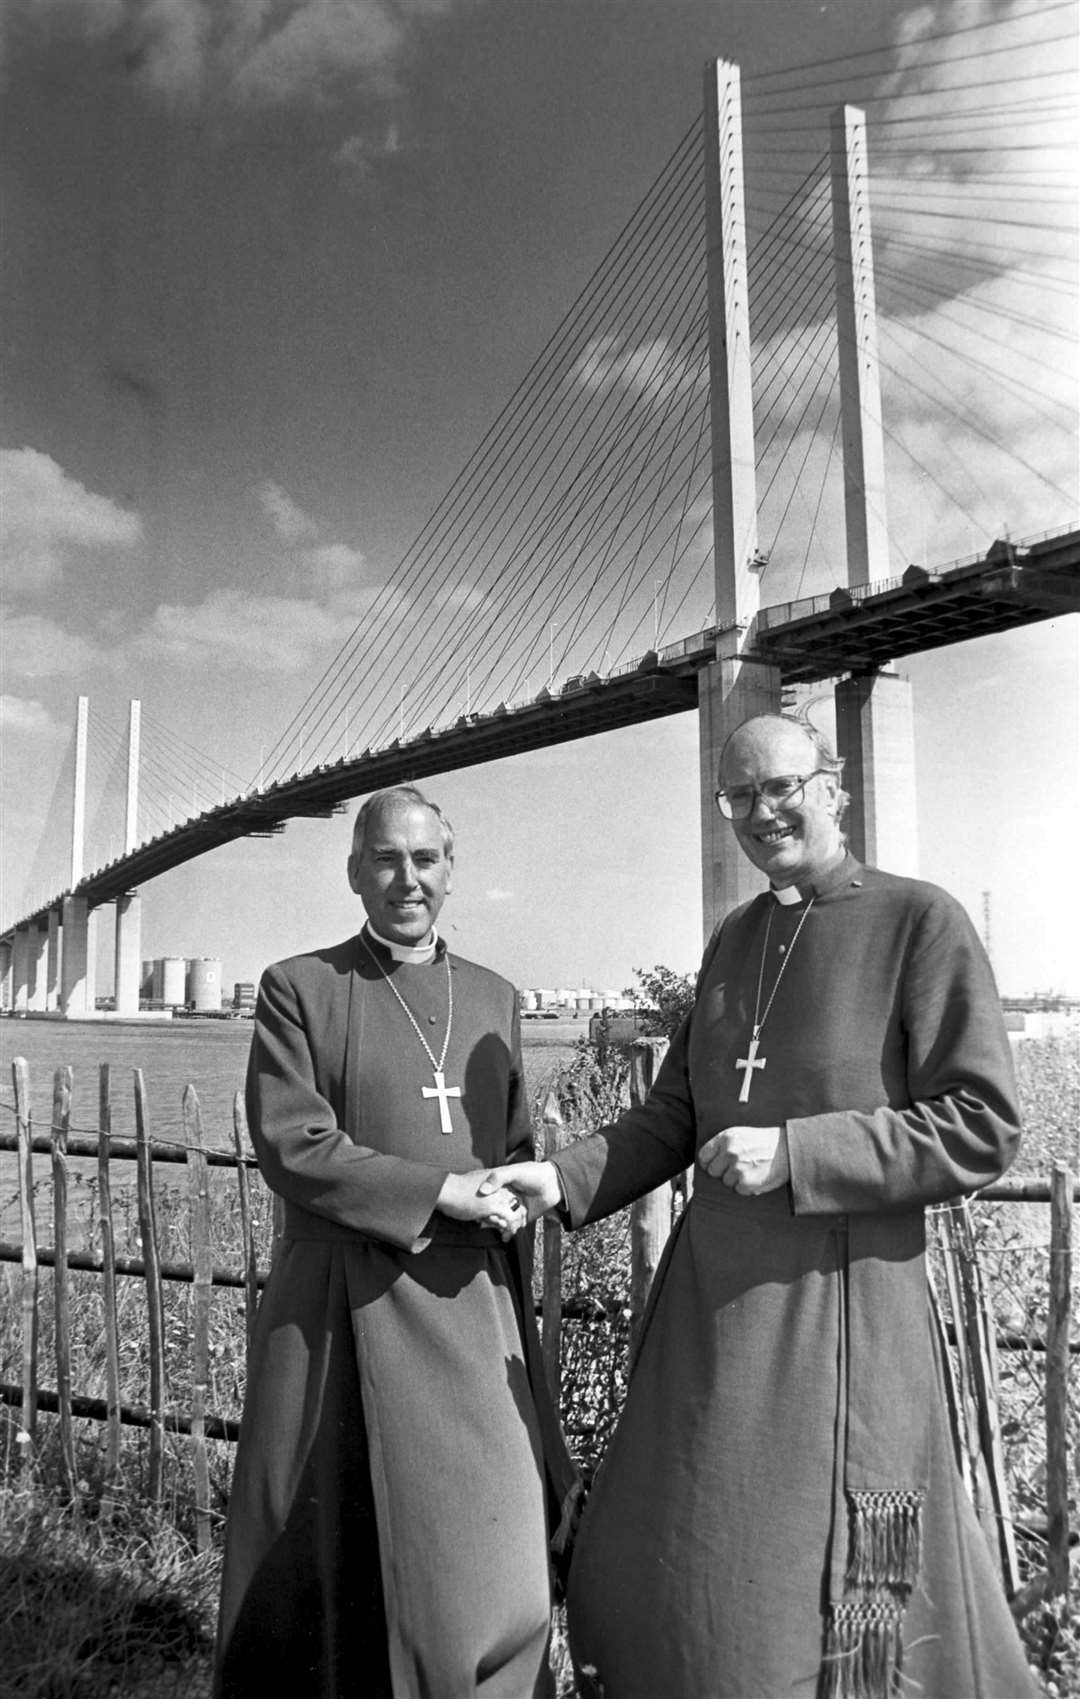 The Bishops of Chelmsford and Rochester meet to bless the Queen Elizabeth Bridge at Dartford in 1991